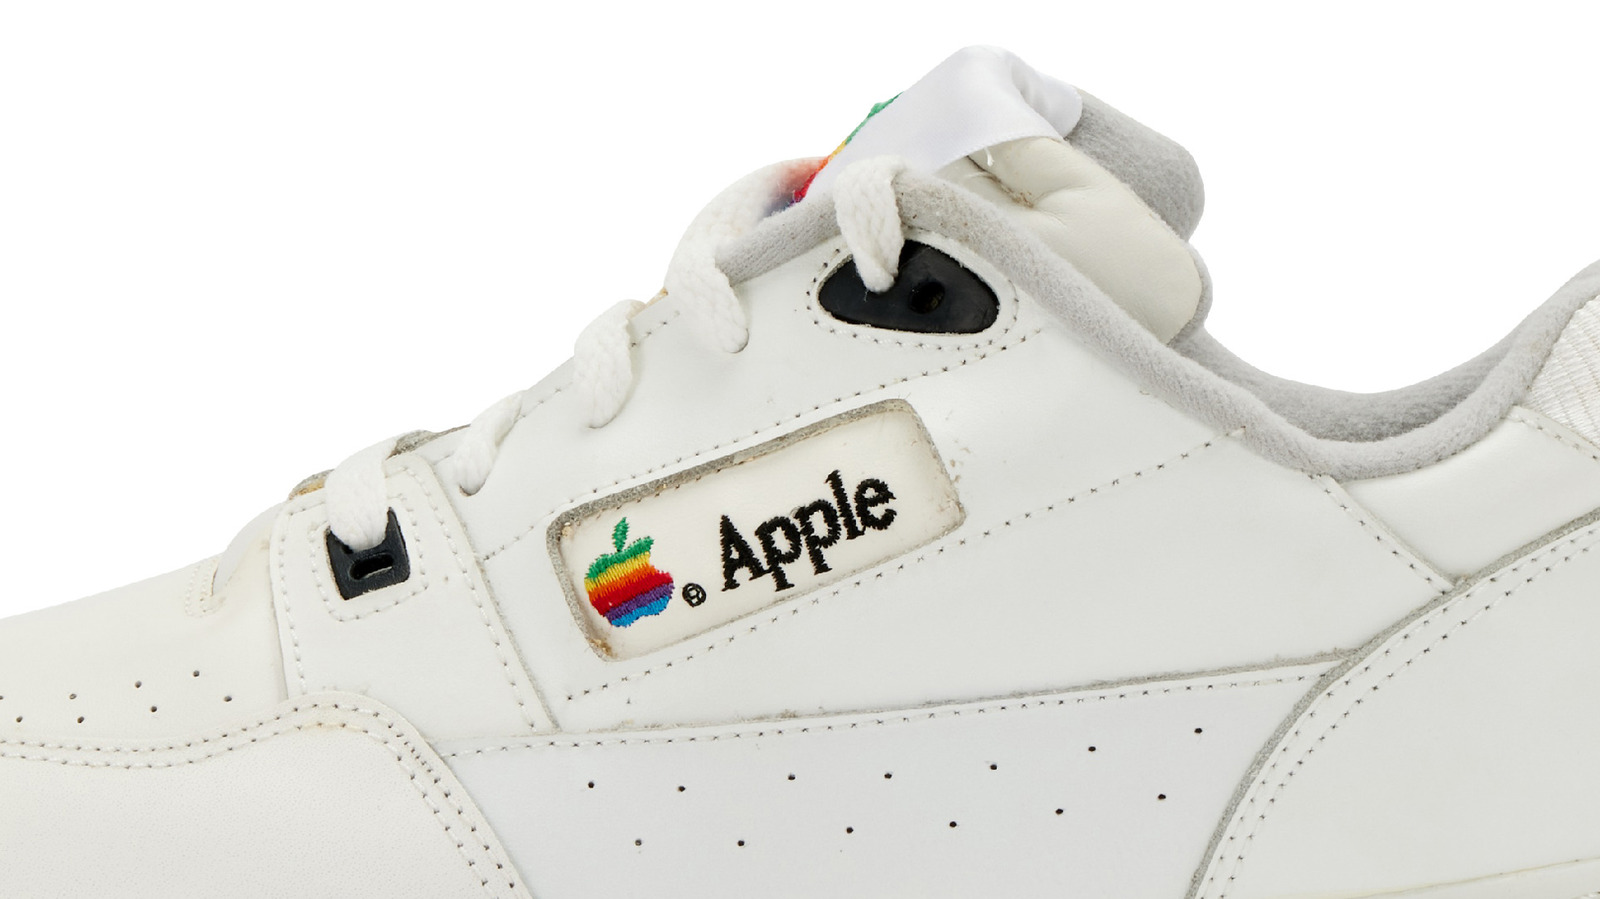 A Pair Of Rare Apple Sneakers Are Up For Sale, And They Cost Way More Than You’d Think – SlashGear